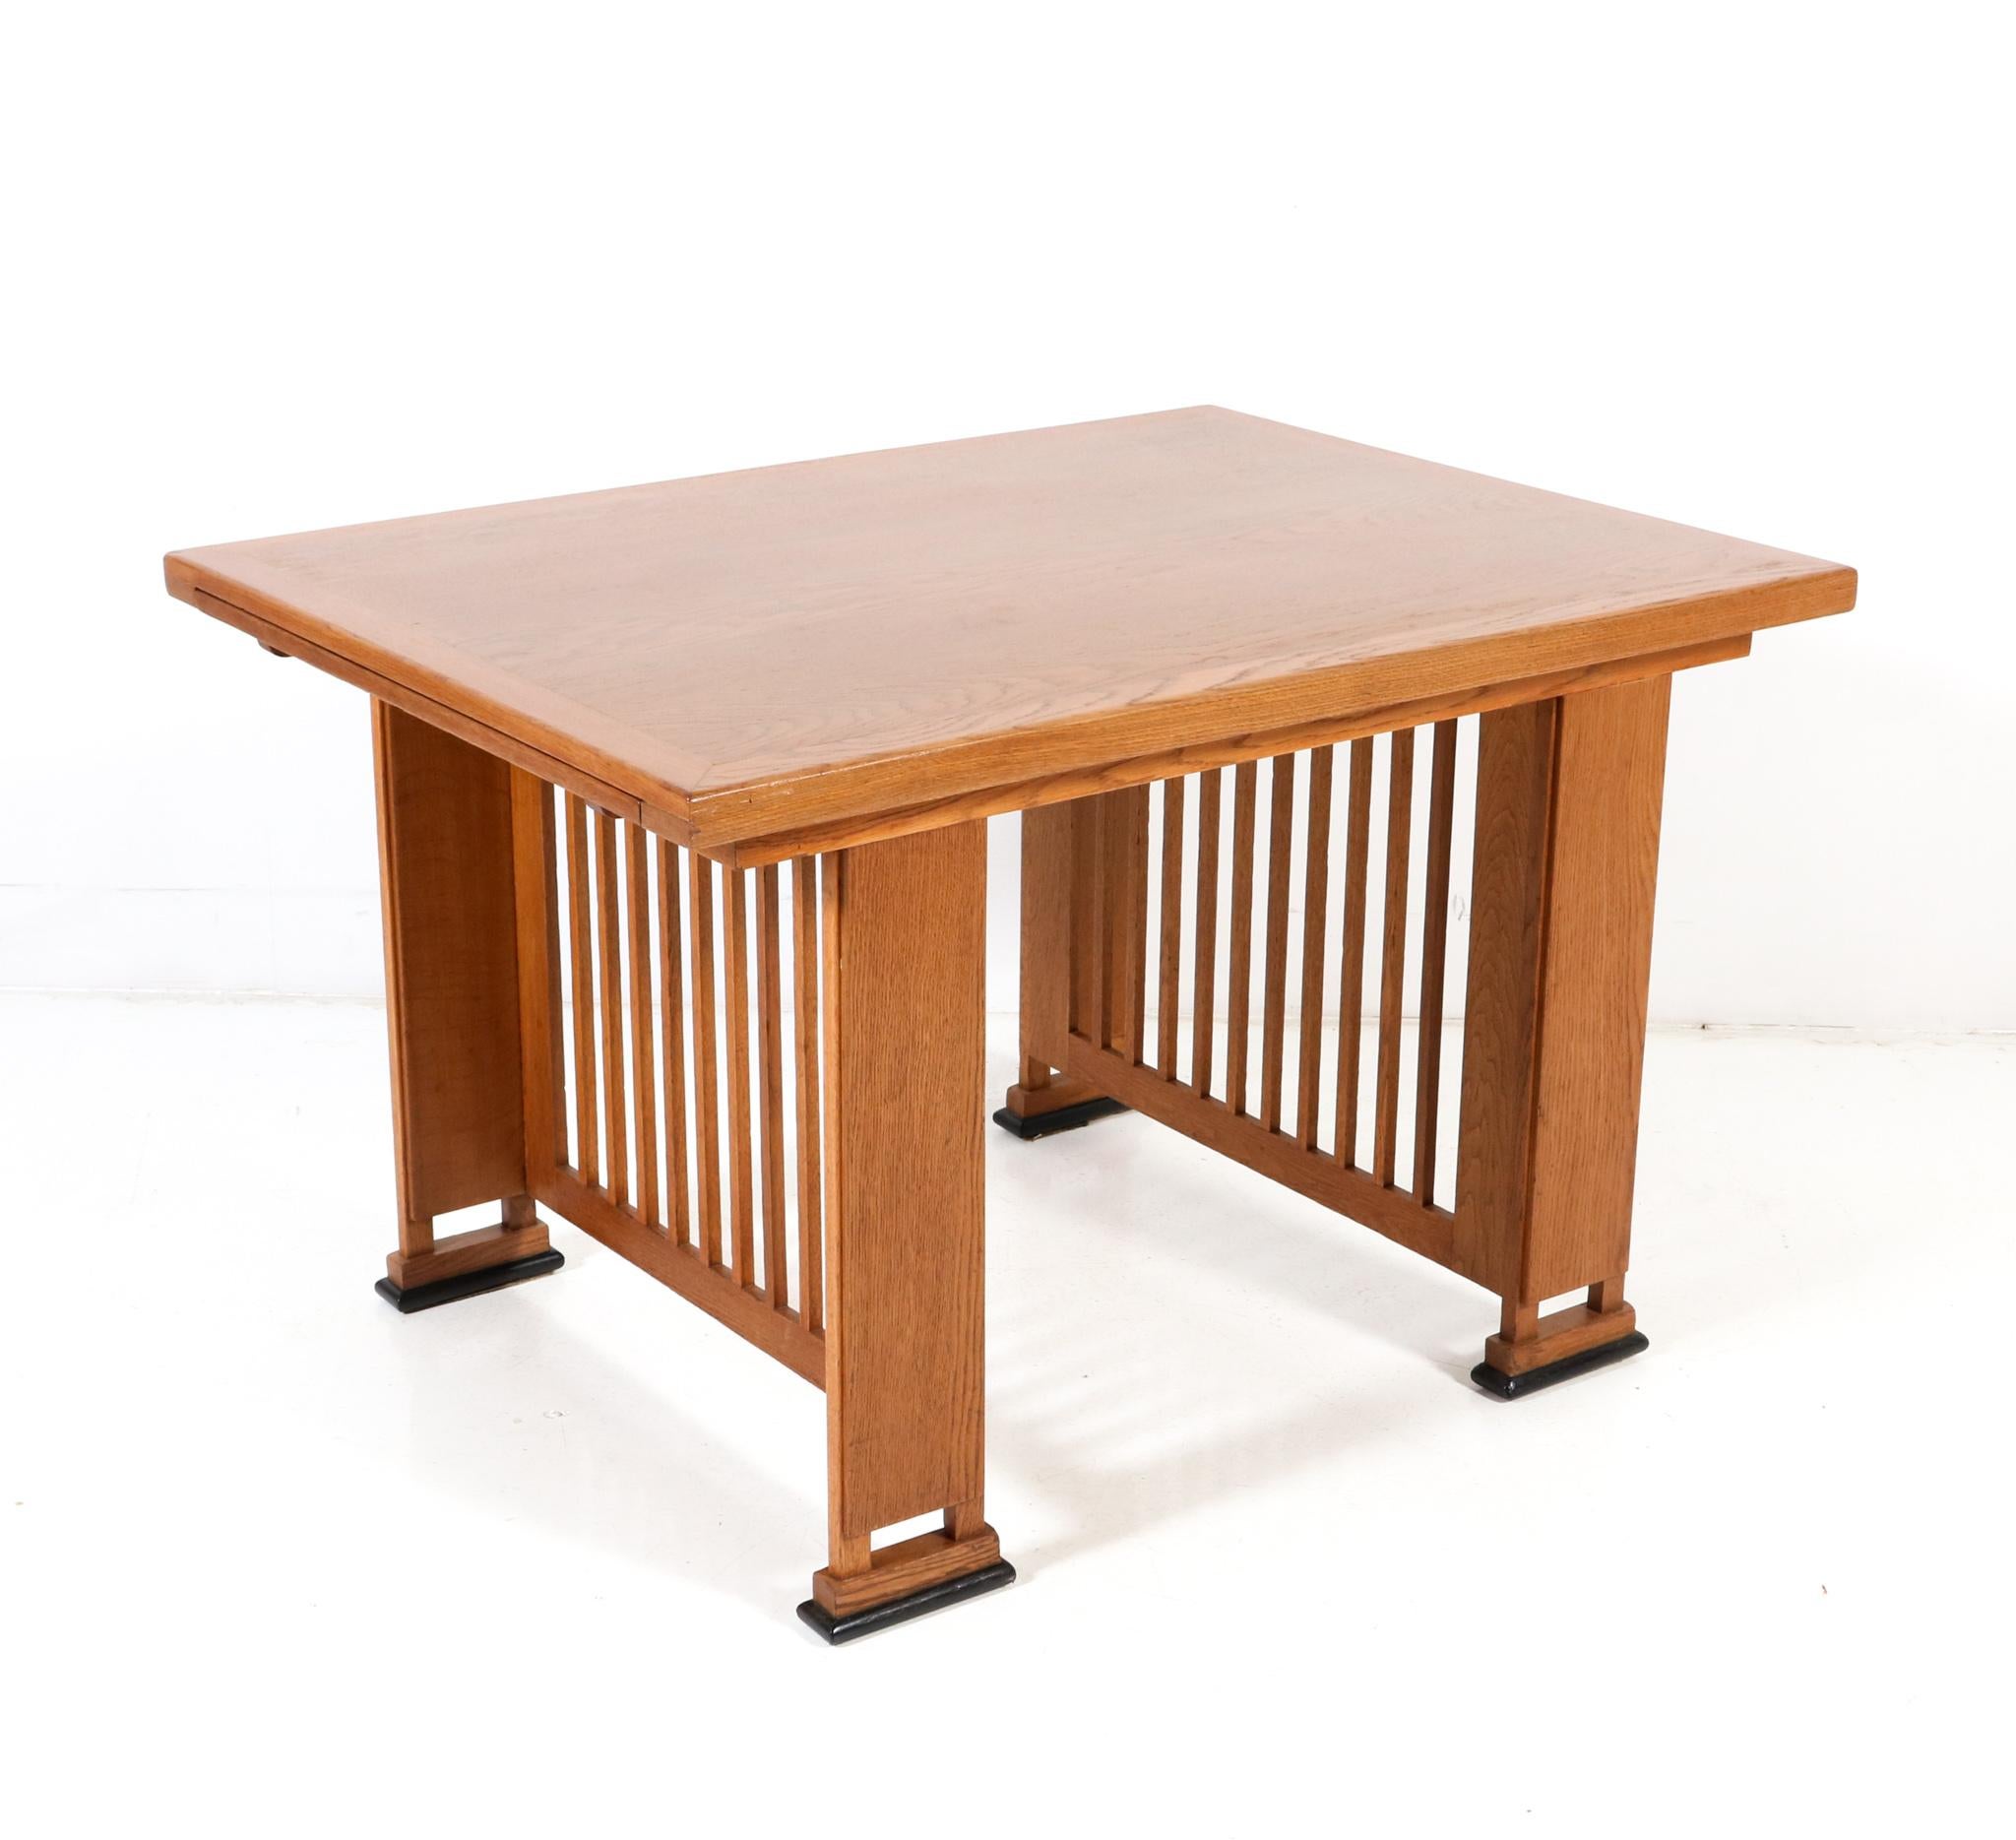 Oak Art Deco Modernist Writing Table or Dining Table by Architect Caspers, 1920s For Sale 3